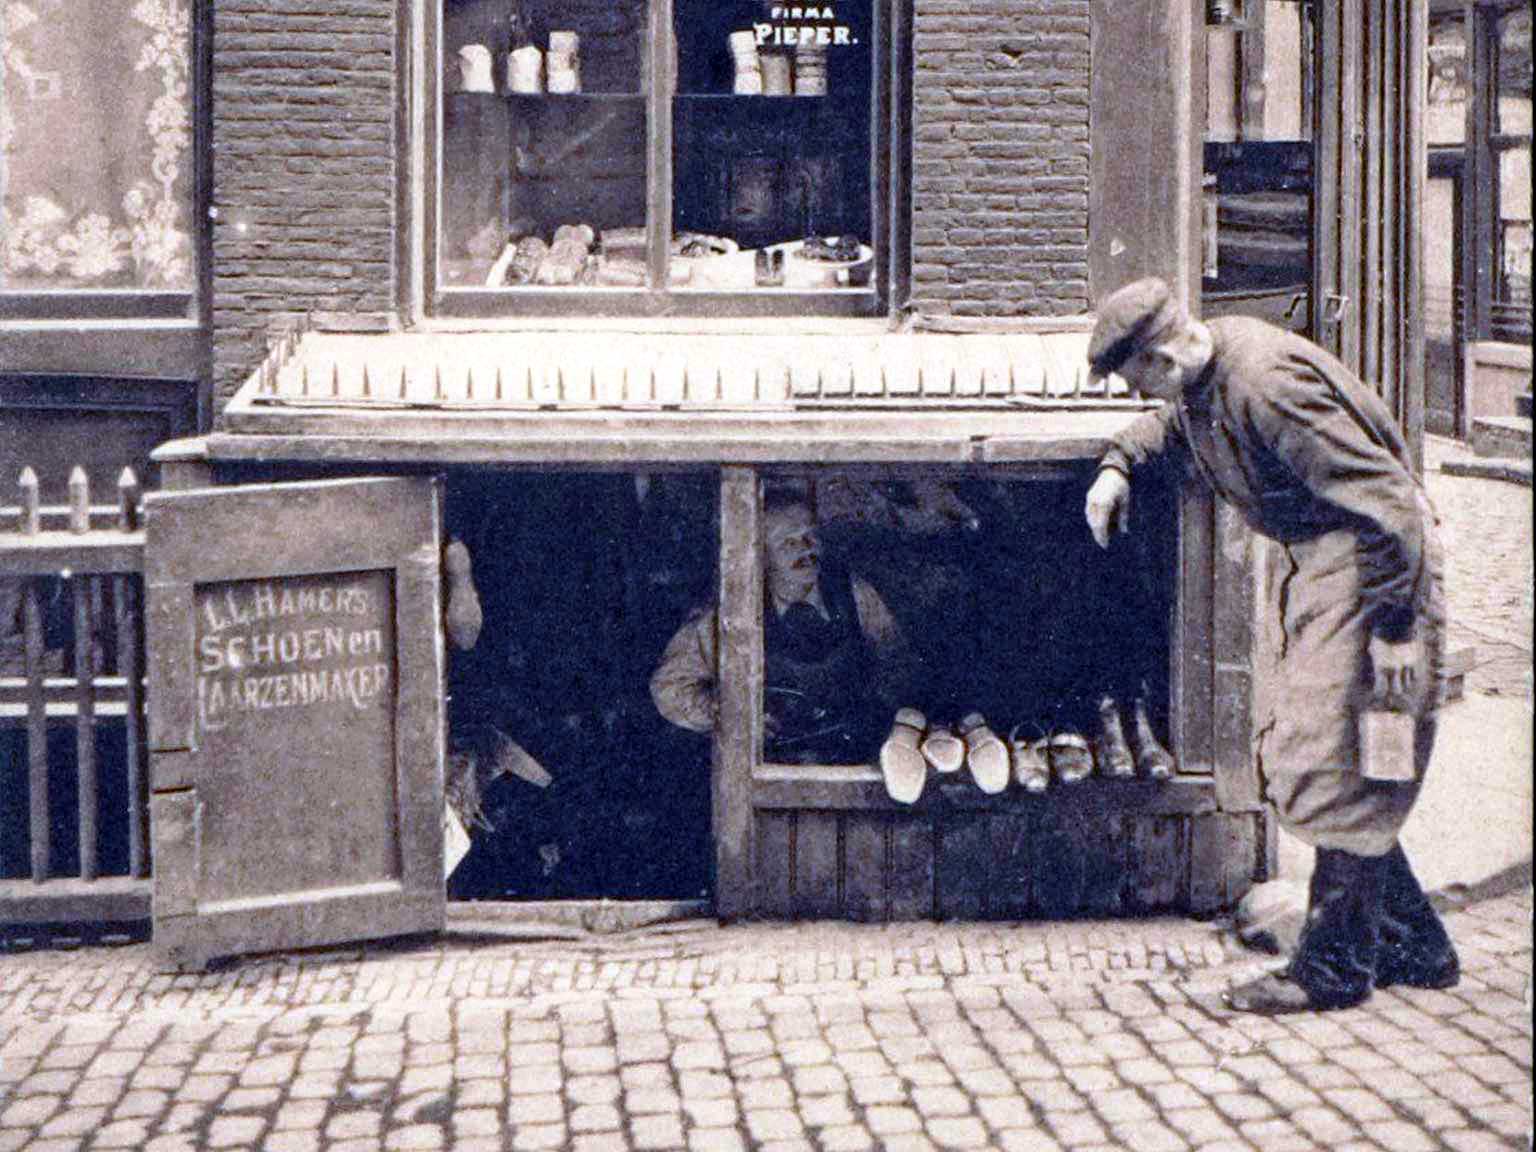 Shoemaker's repair shop in a well house on Nes 87, 1910, Amsterdam